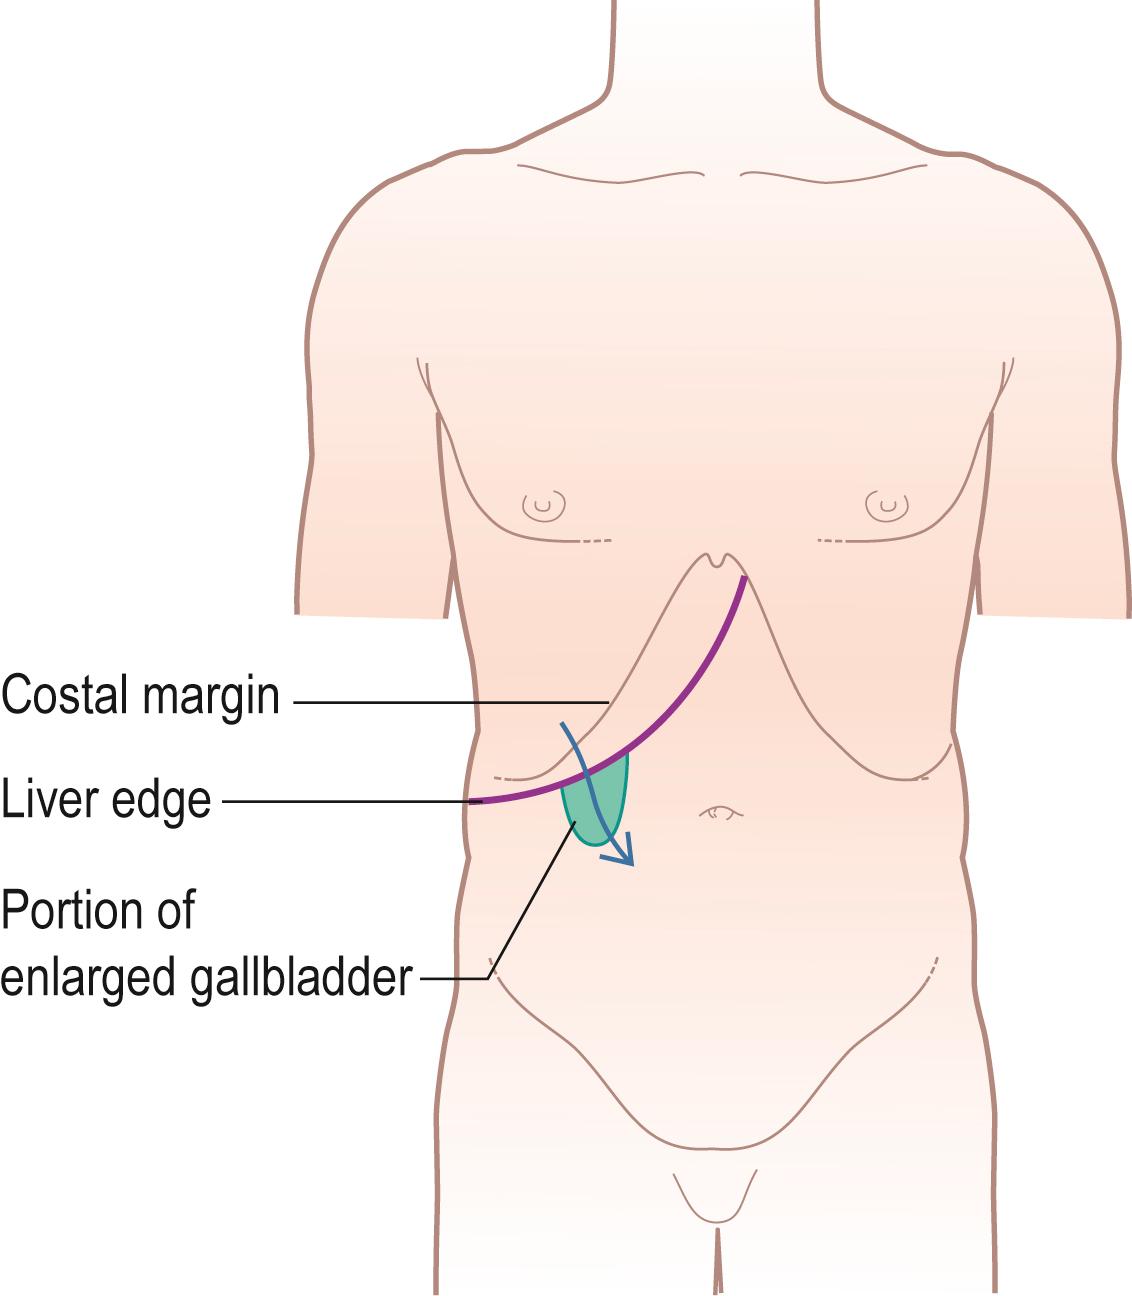 Figure 14.15, Palpation of an enlarged gallbladder, showing how it merges with the inferior border of the liver so that only the fundus of the gallbladder and part of its body can be palpated.